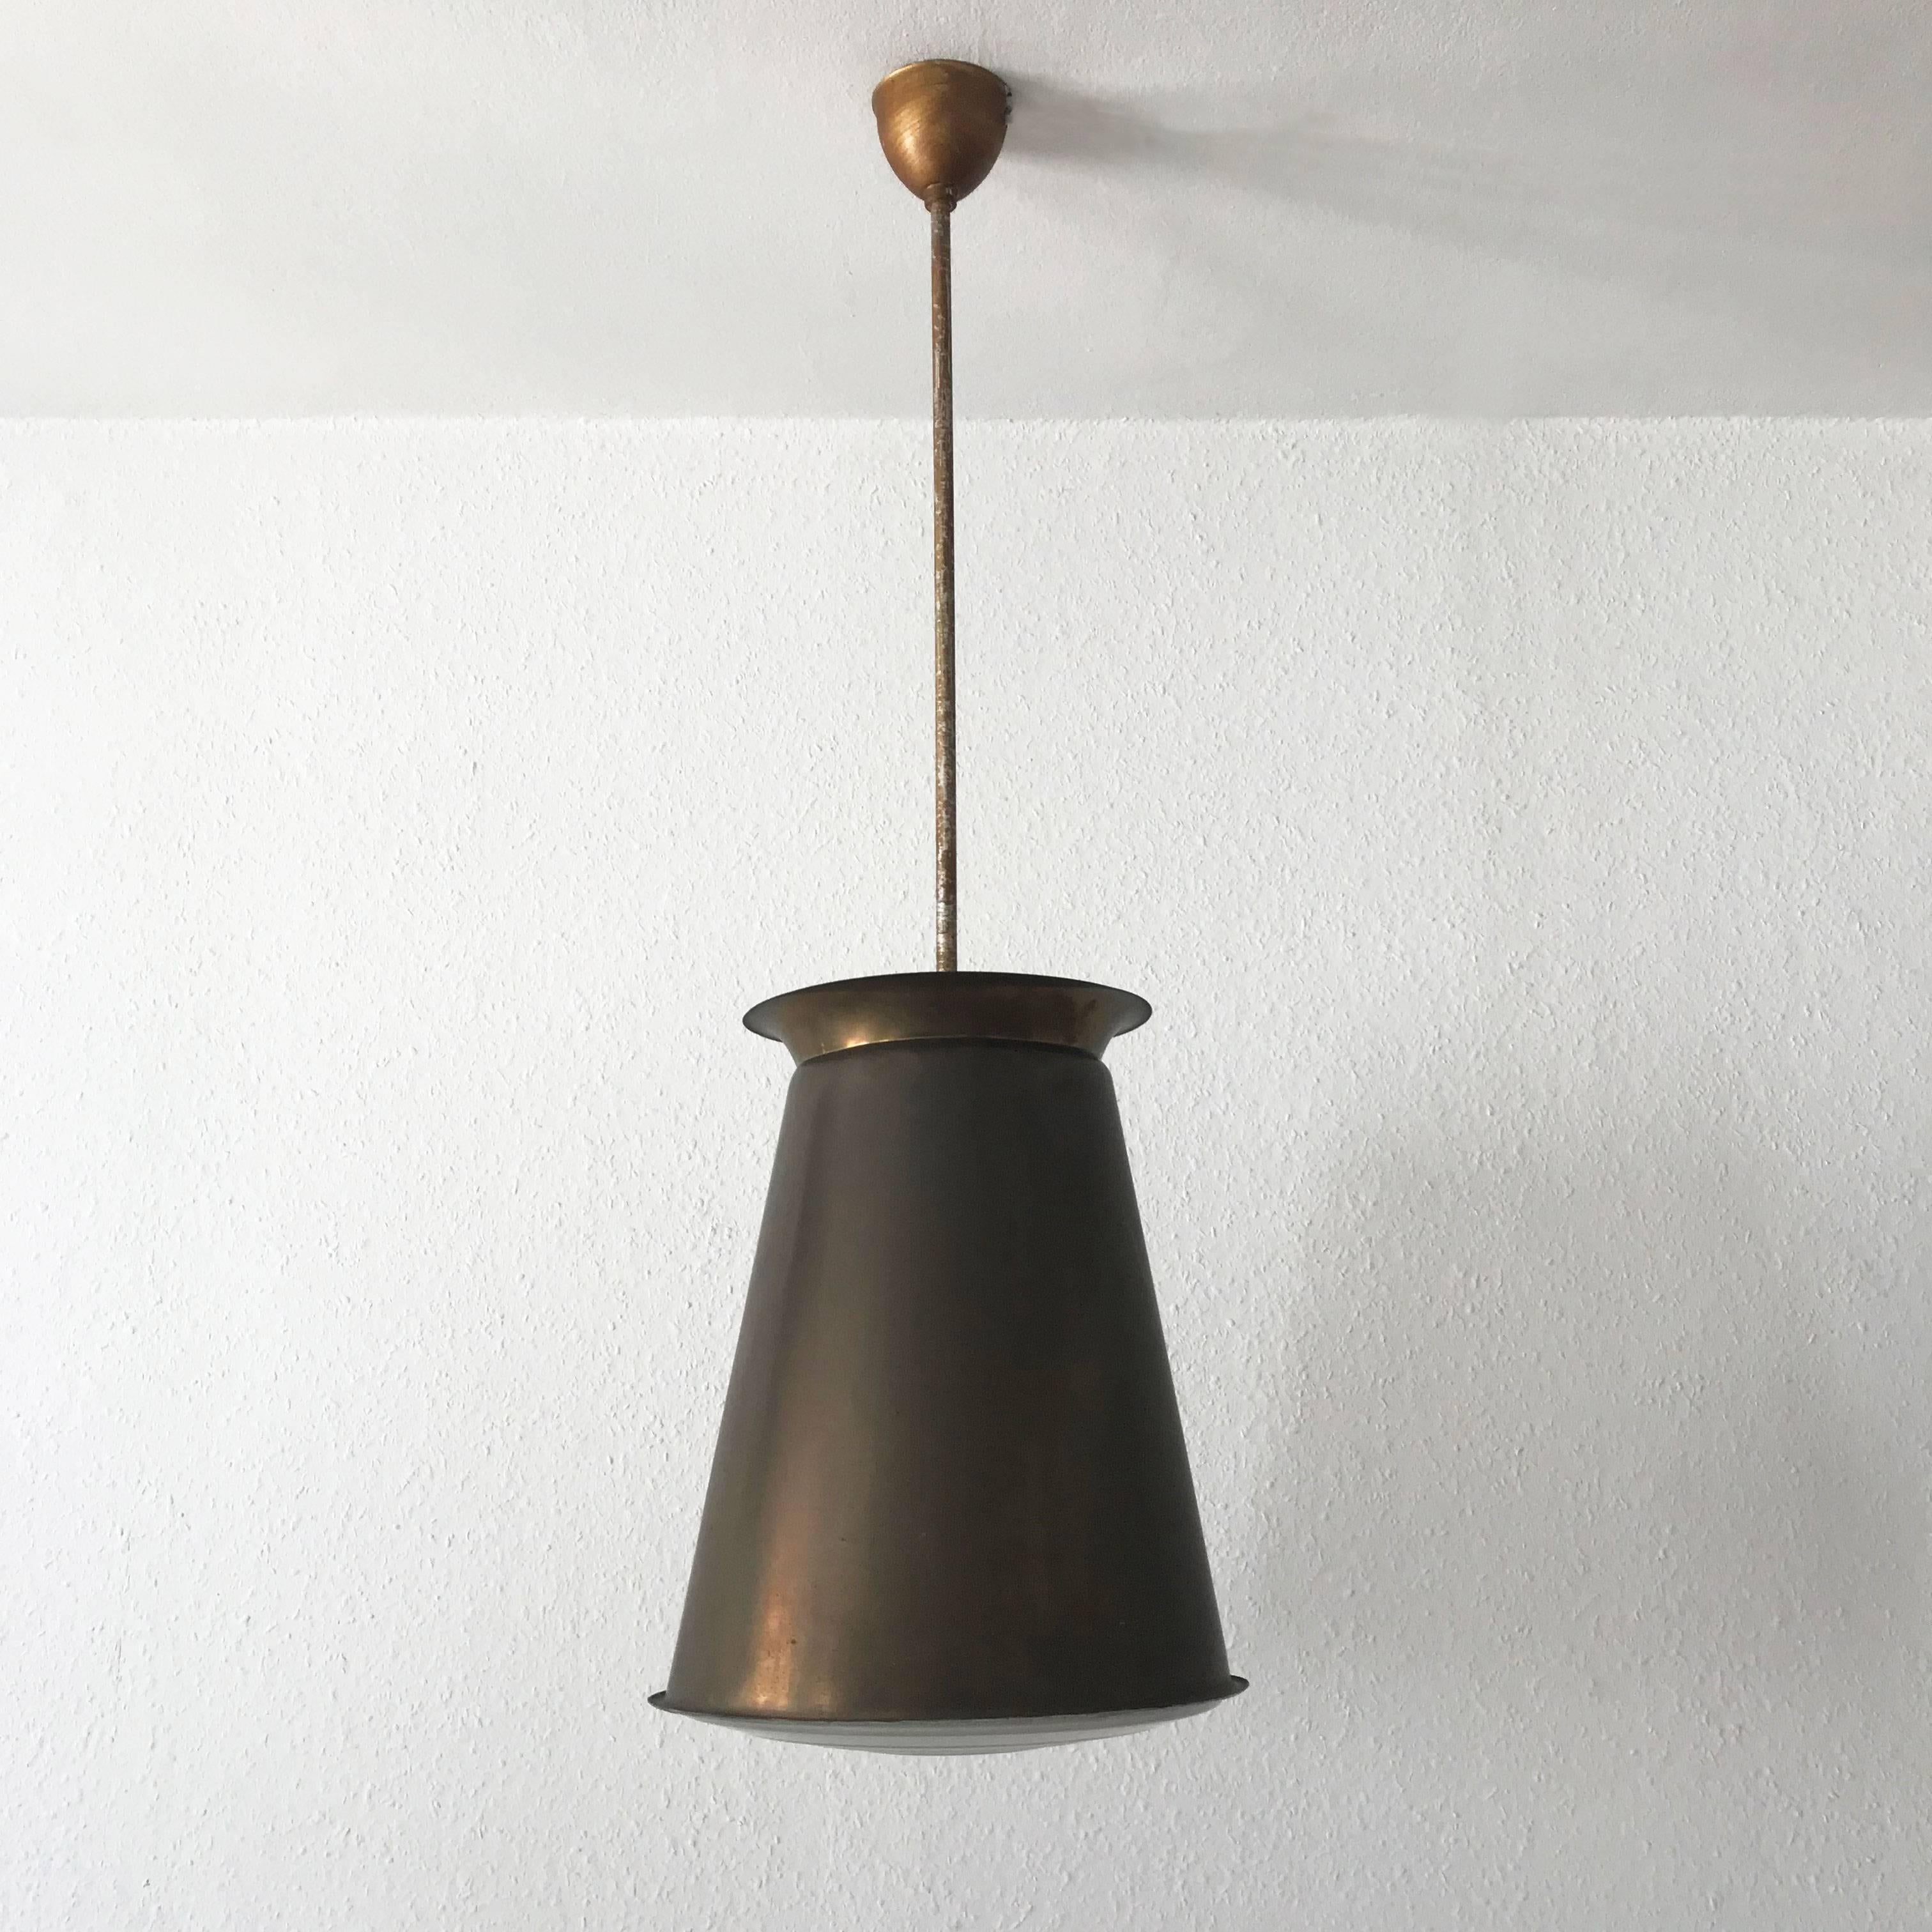 Unique Bauhaus or Modernist pendant lamps. Designed by Adolf Meyer in 1920s and manufactured by Zeiss Ikon, in 1920s-1930s, Germany.
On one of the glass shades is the mark of the maker most visible: ZEISS IKON. JZ 51 NR.1 C7 (see the last